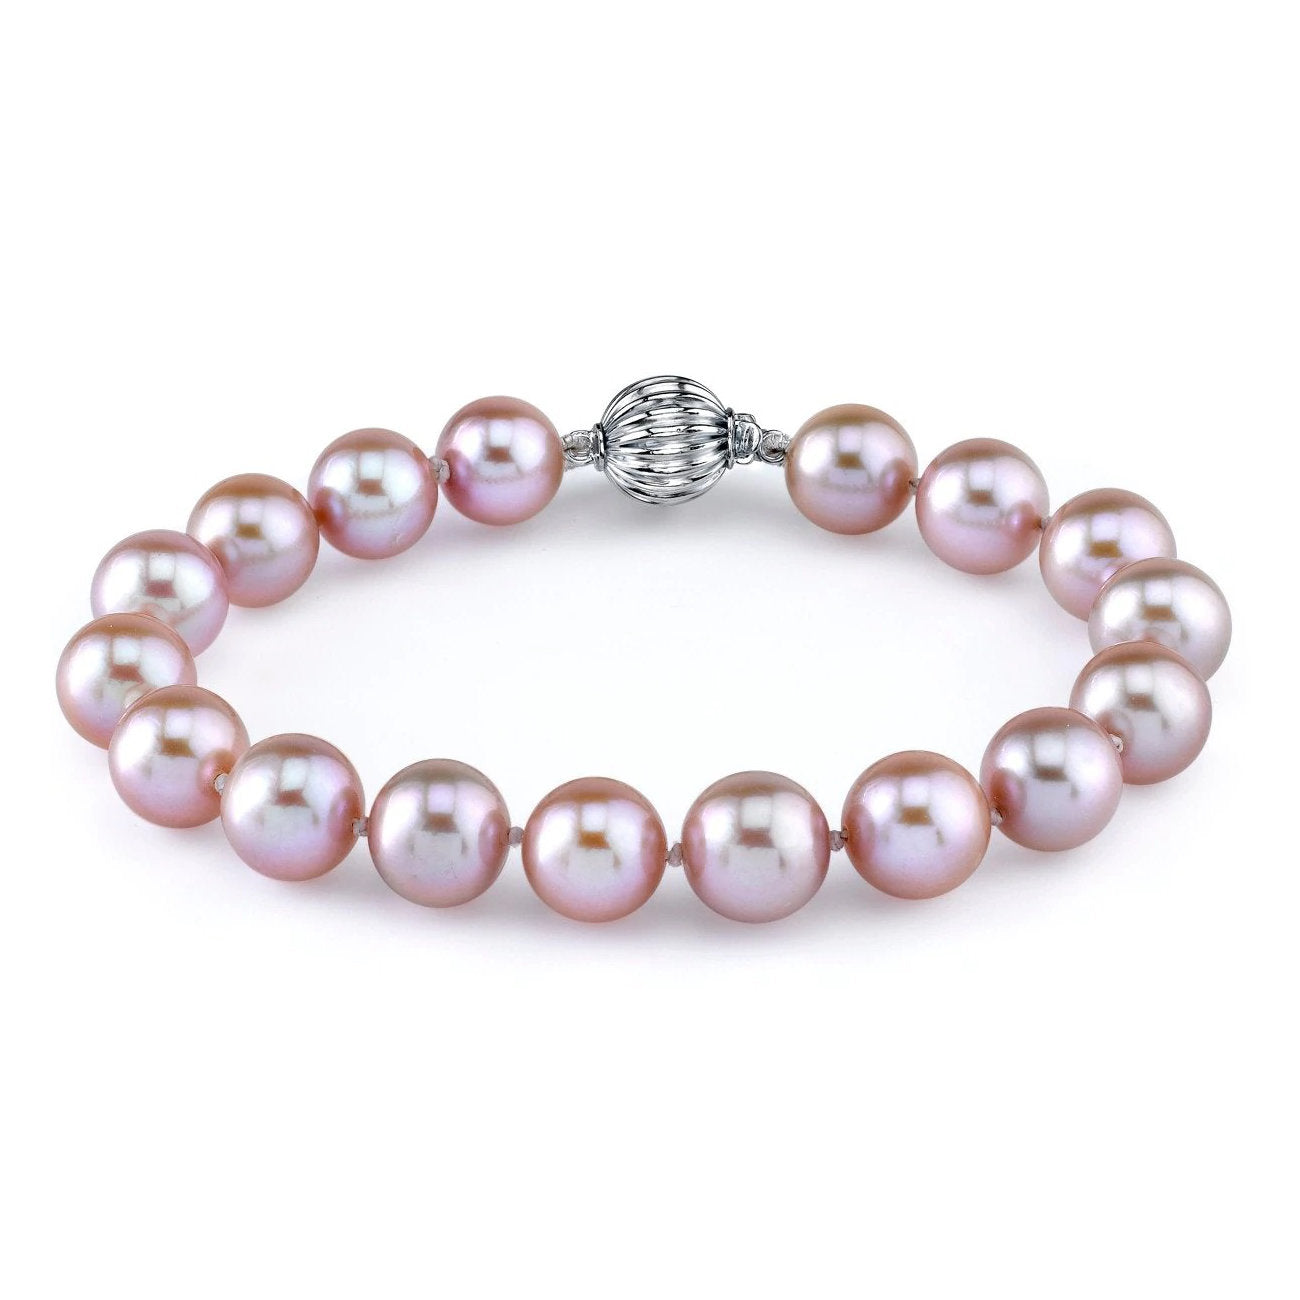 7.0-7.5mm Pink Freshwater Pearl Bracelet in AAA Quality from Pure Pearls